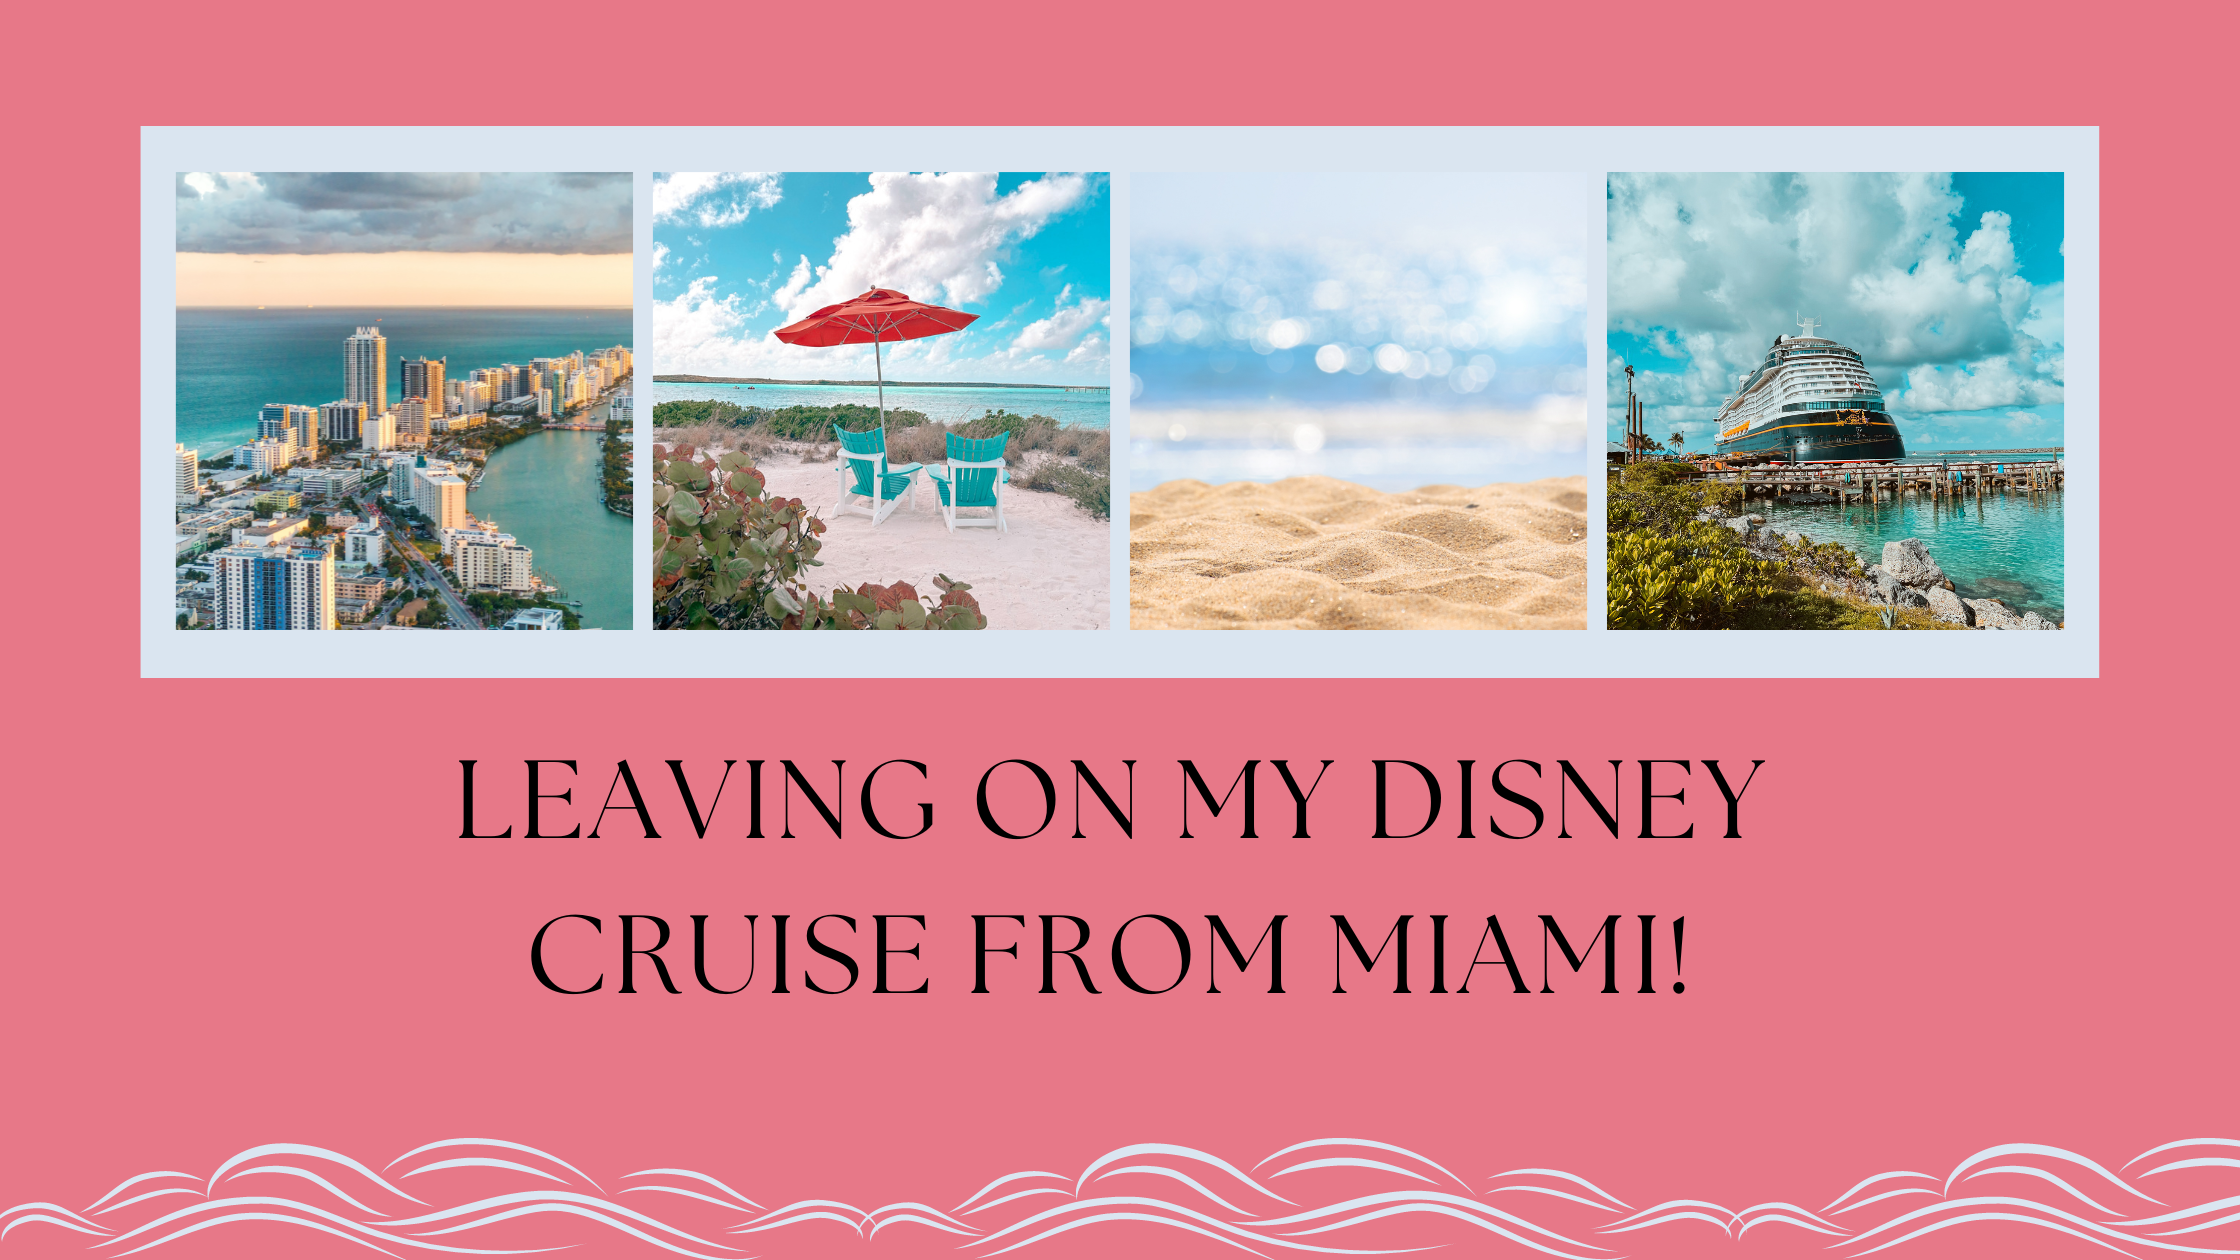 Travel Day: Leaving on a Disney Cruise from Miami!